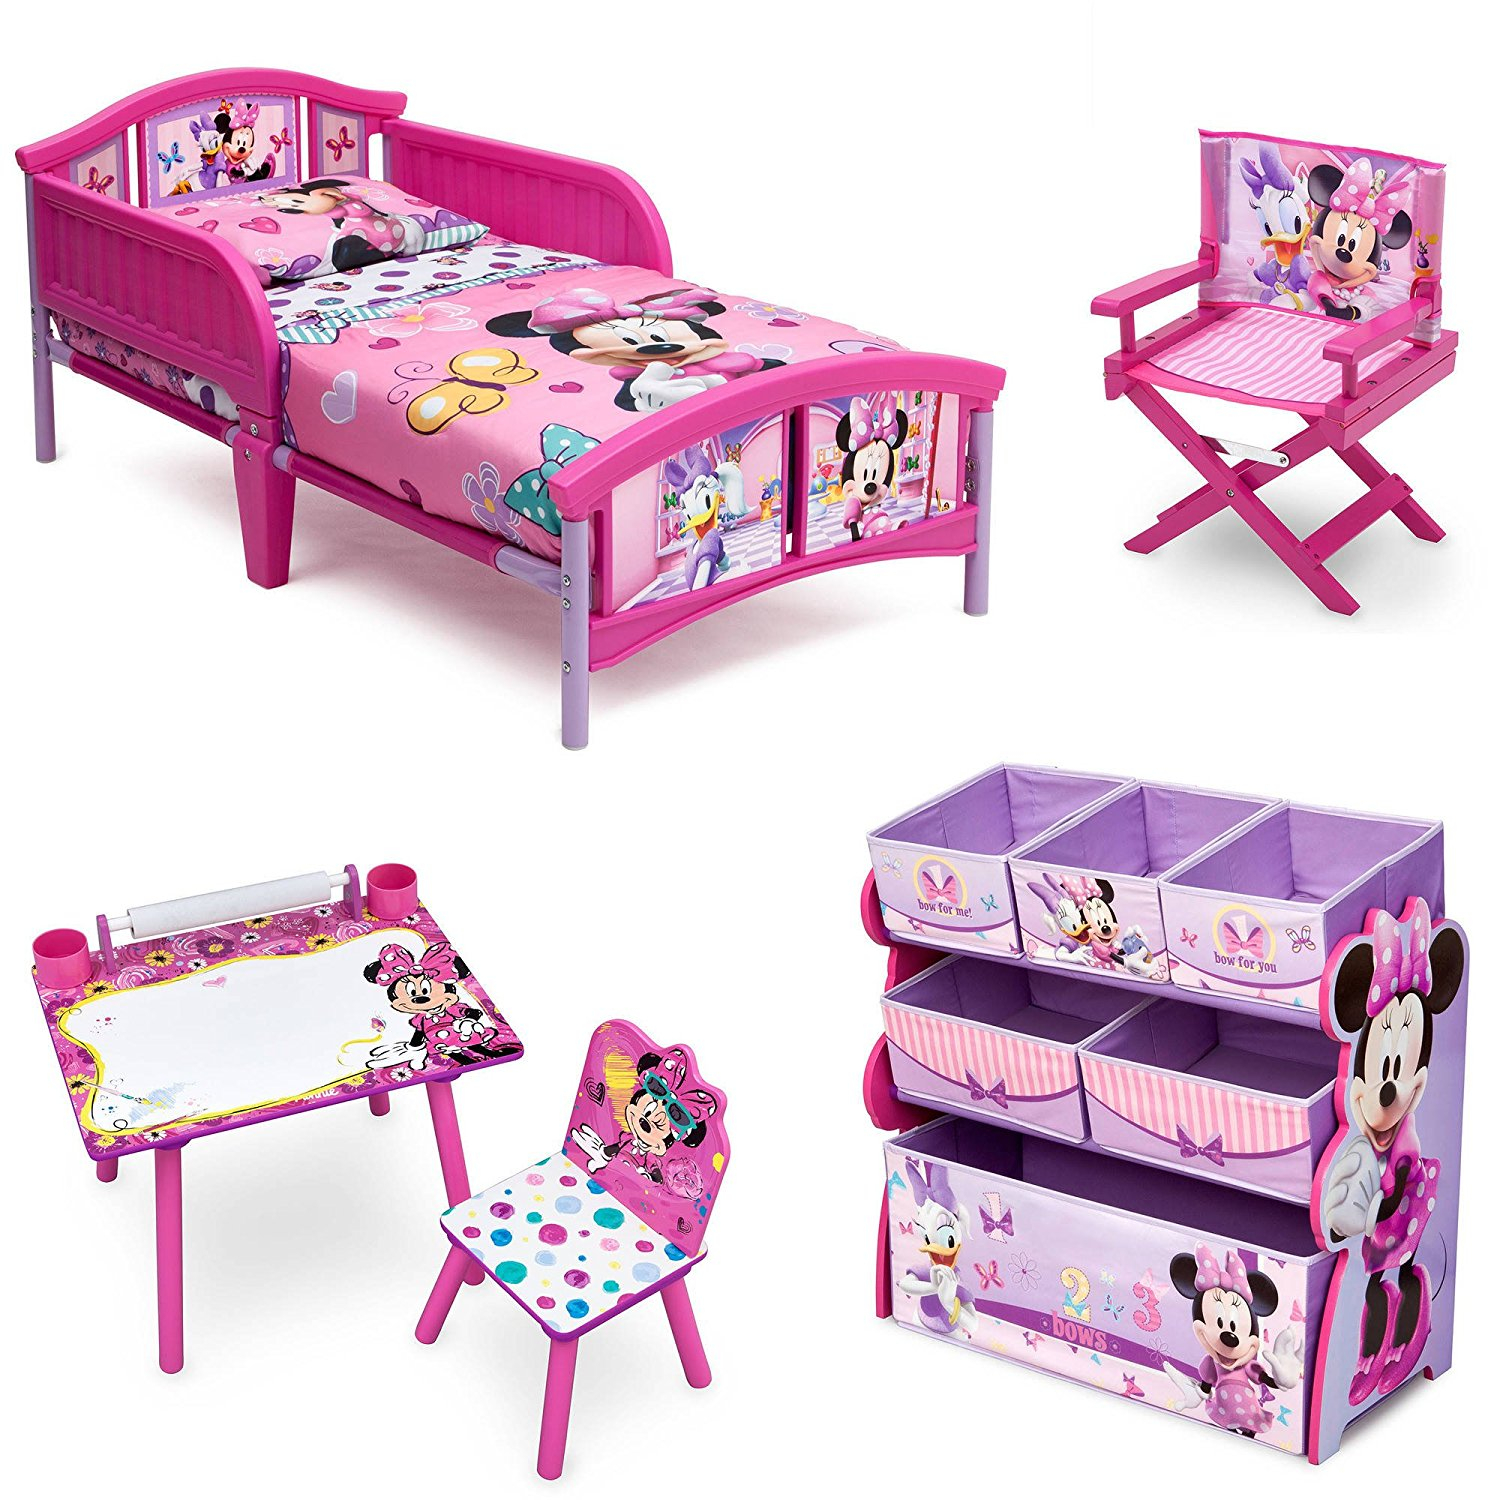 Disney Minnie Mouse Room In A Box 4 Piece Walmart throughout proportions 1500 X 1500